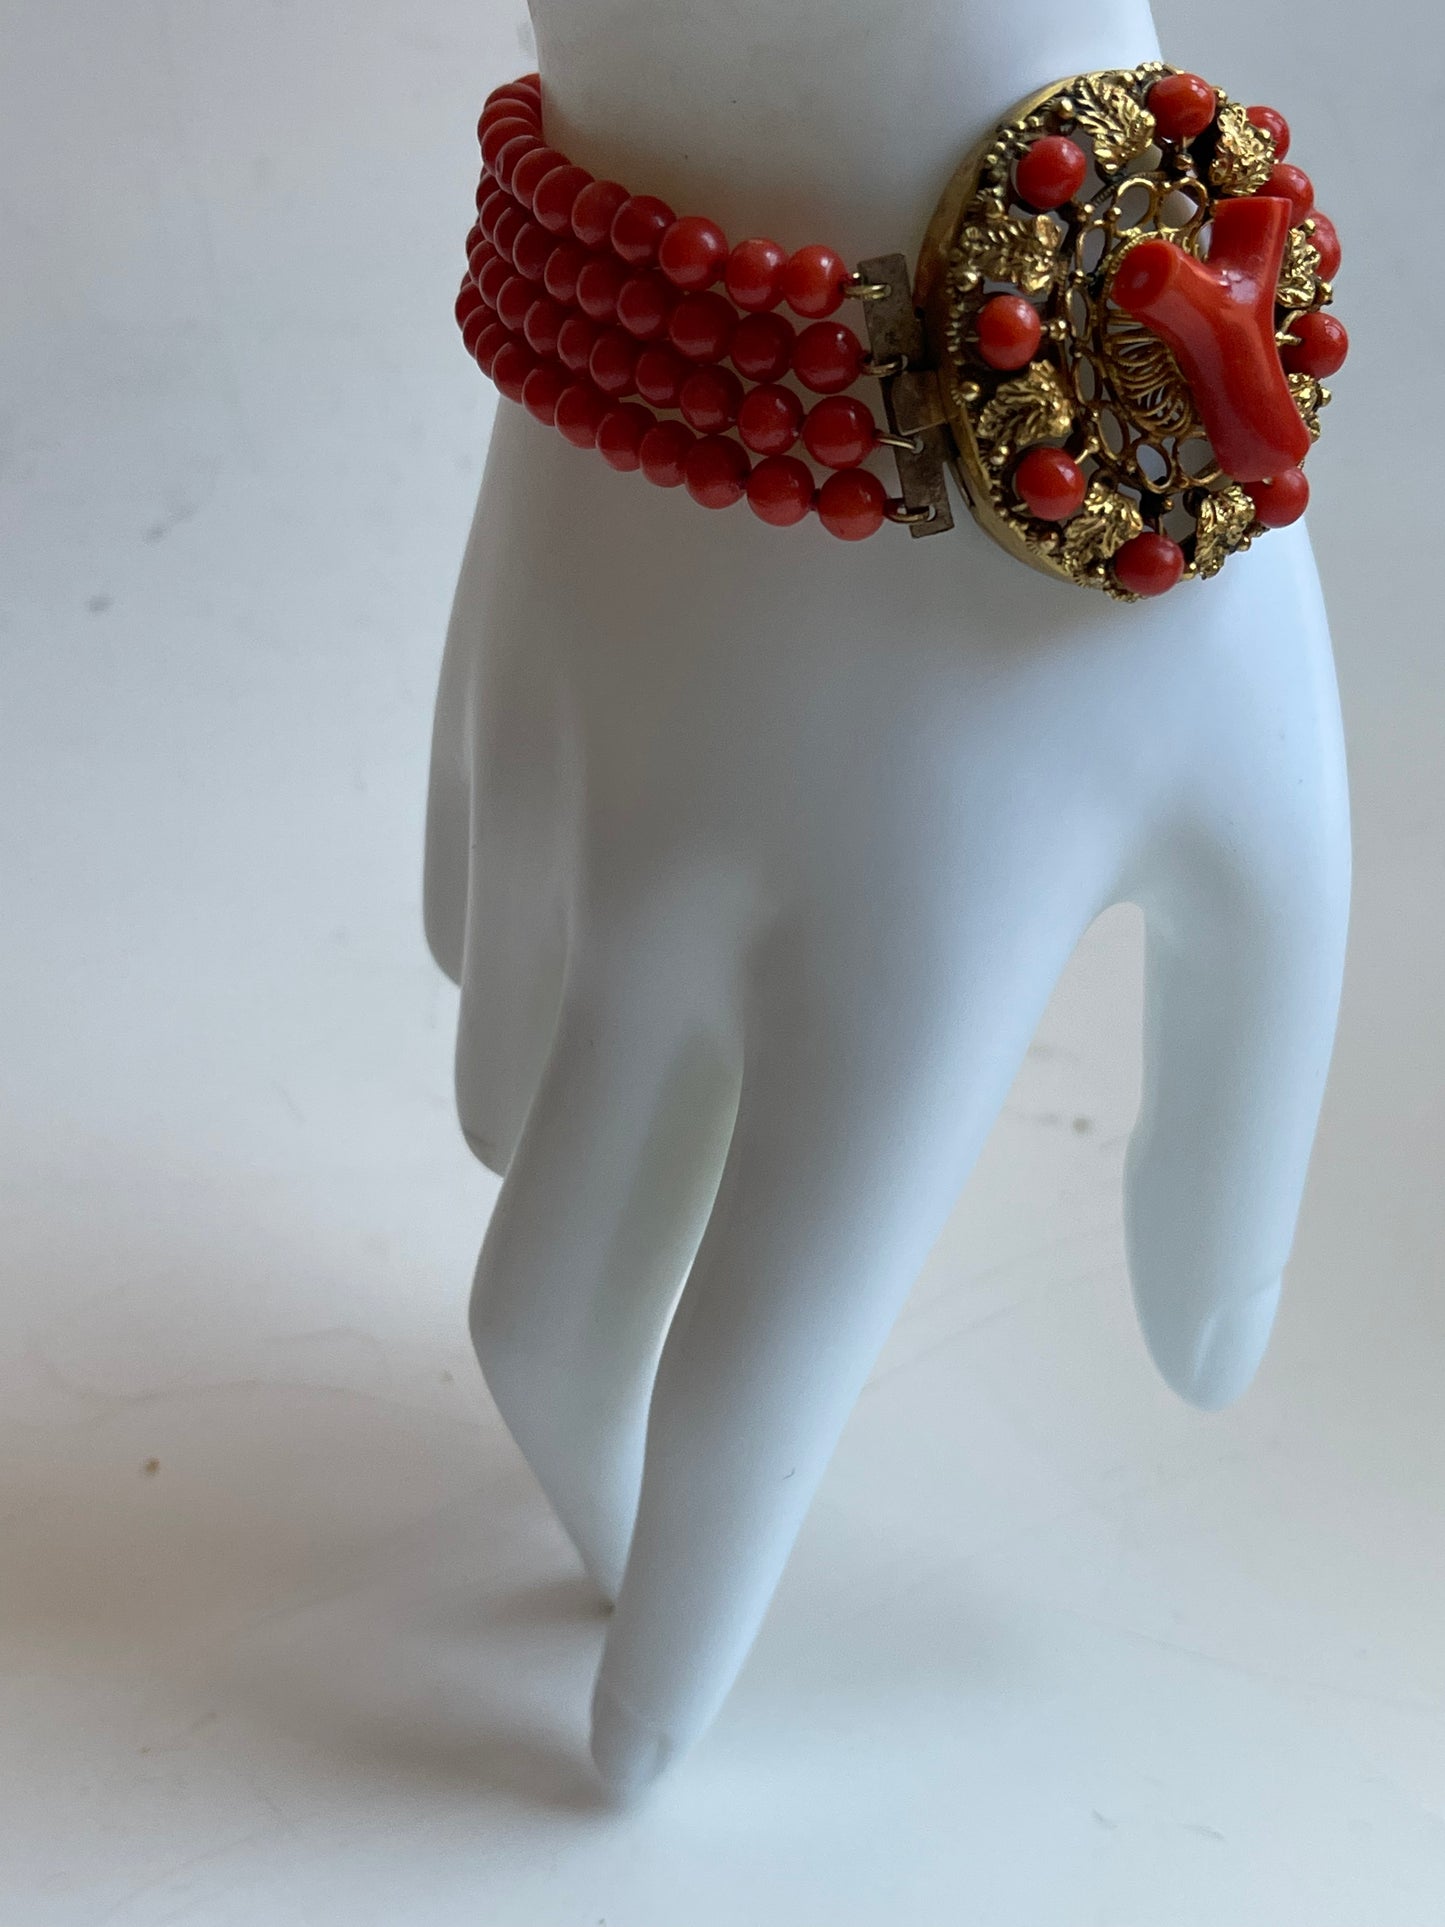 An antique coral bracelet with 4 strings of coral